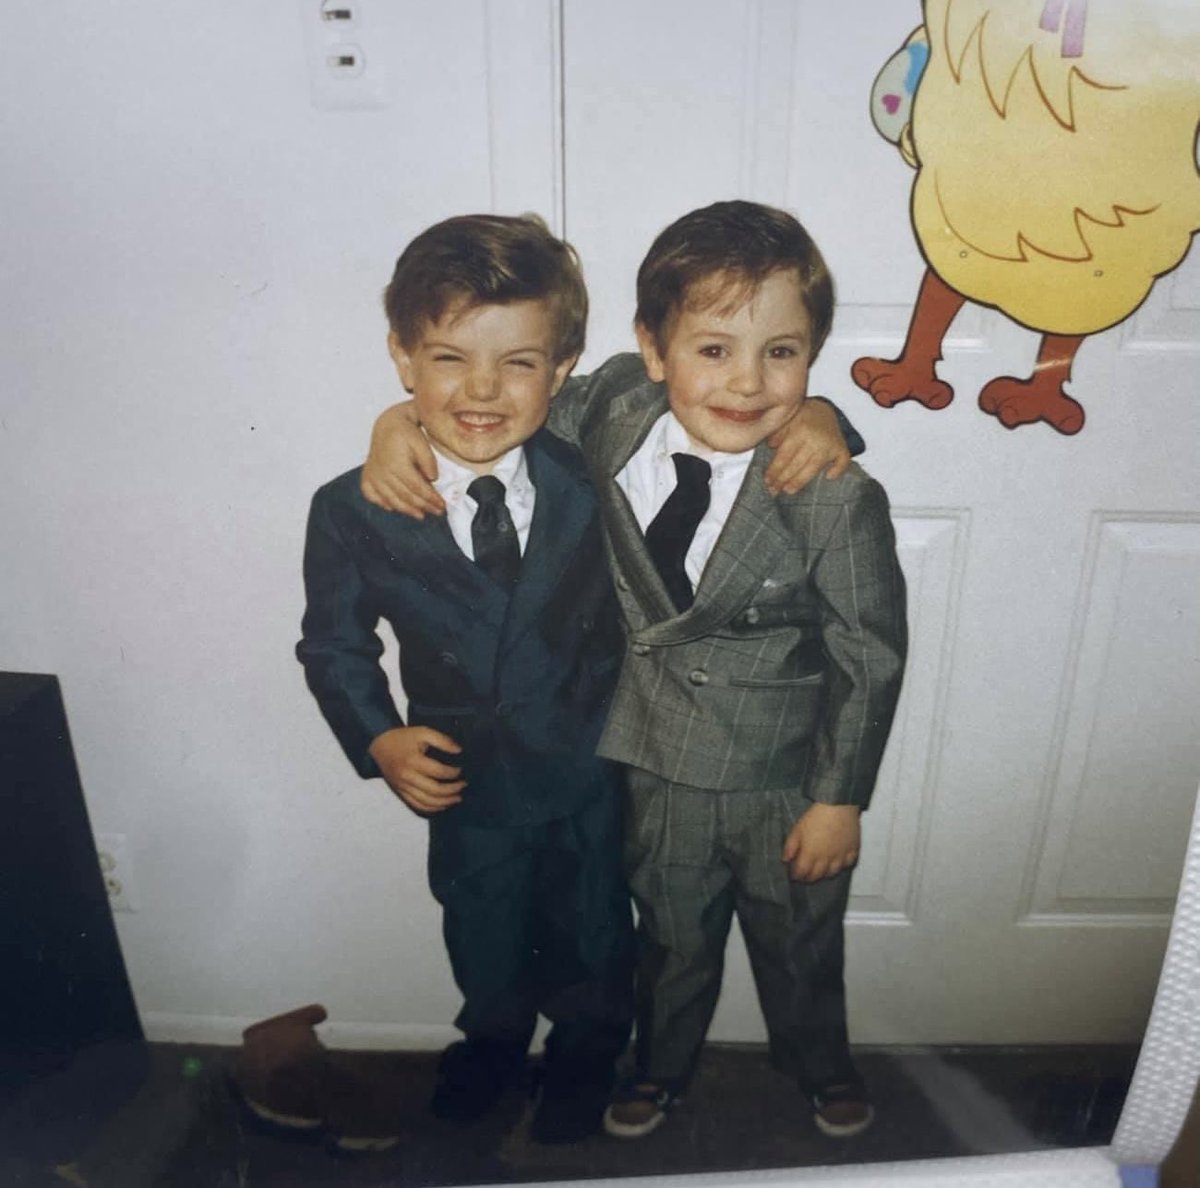 Here’s to #tbt when my mom dressed my brother and I up like Wolf of Wallstreet for Easter. 🥹🥹